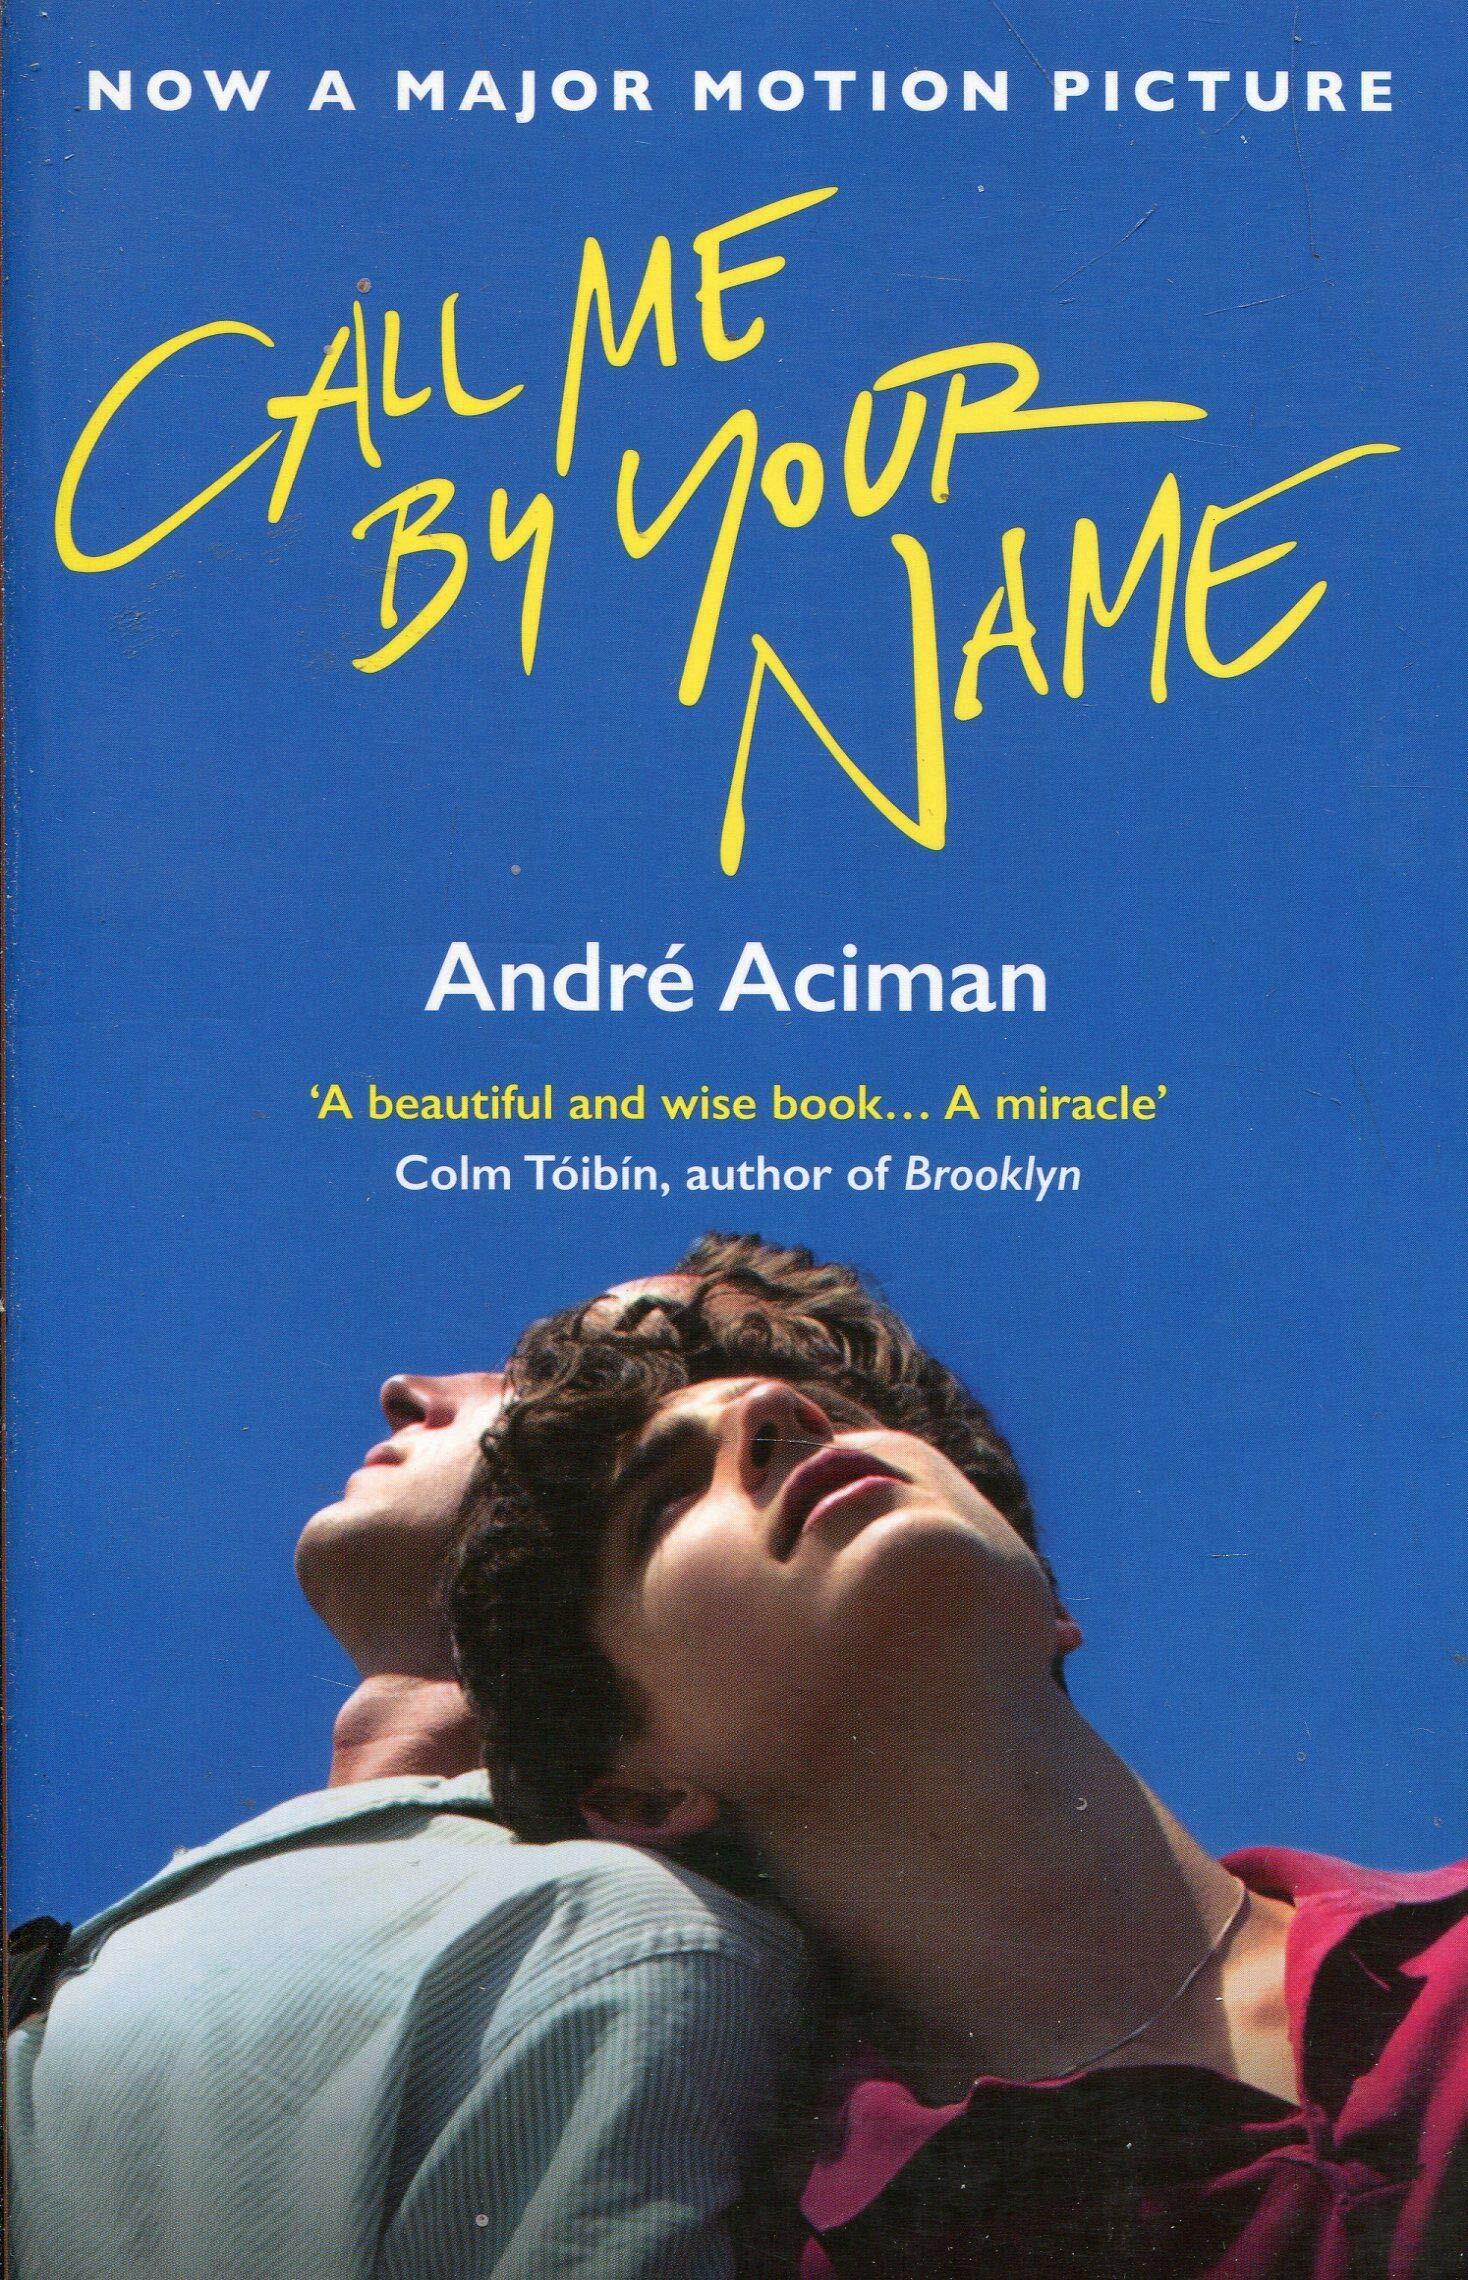 Timothee Chalamet and Armie Hammer lean against each other. The cover of 'Call Me By Your Name'